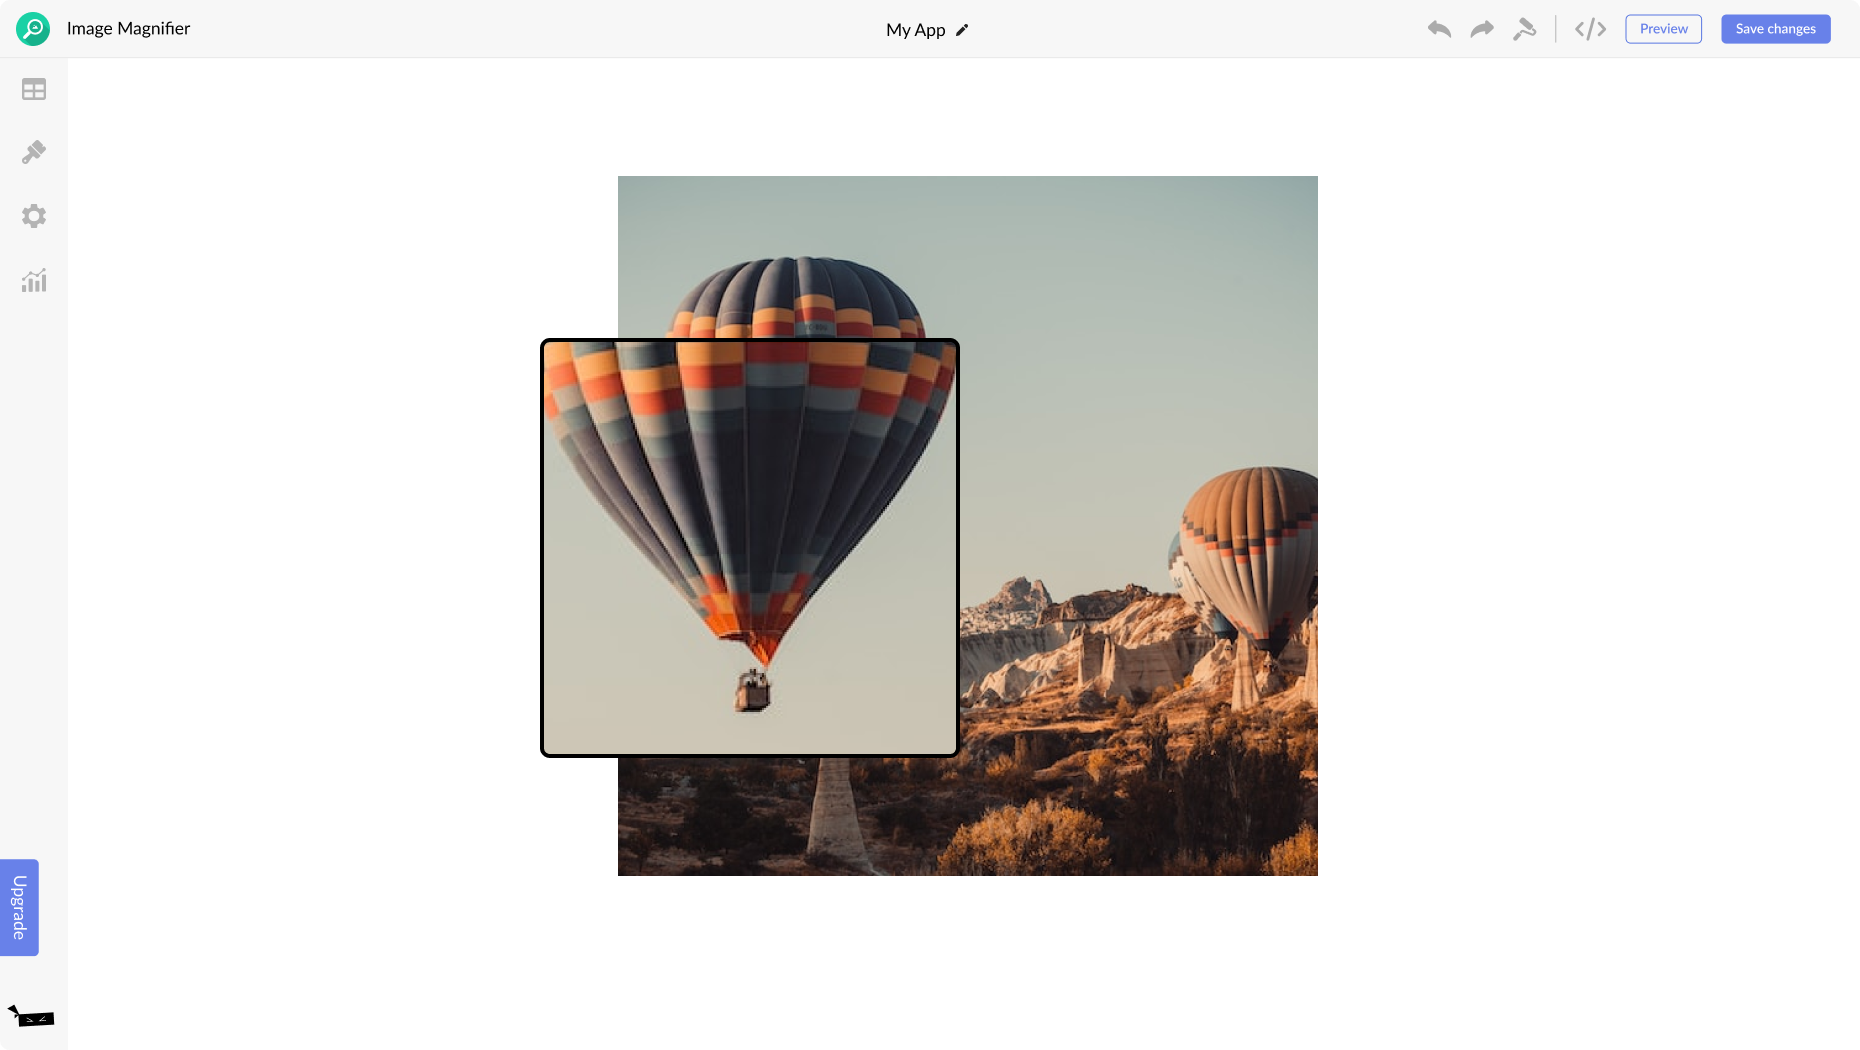 Image Magnifier for Weebly